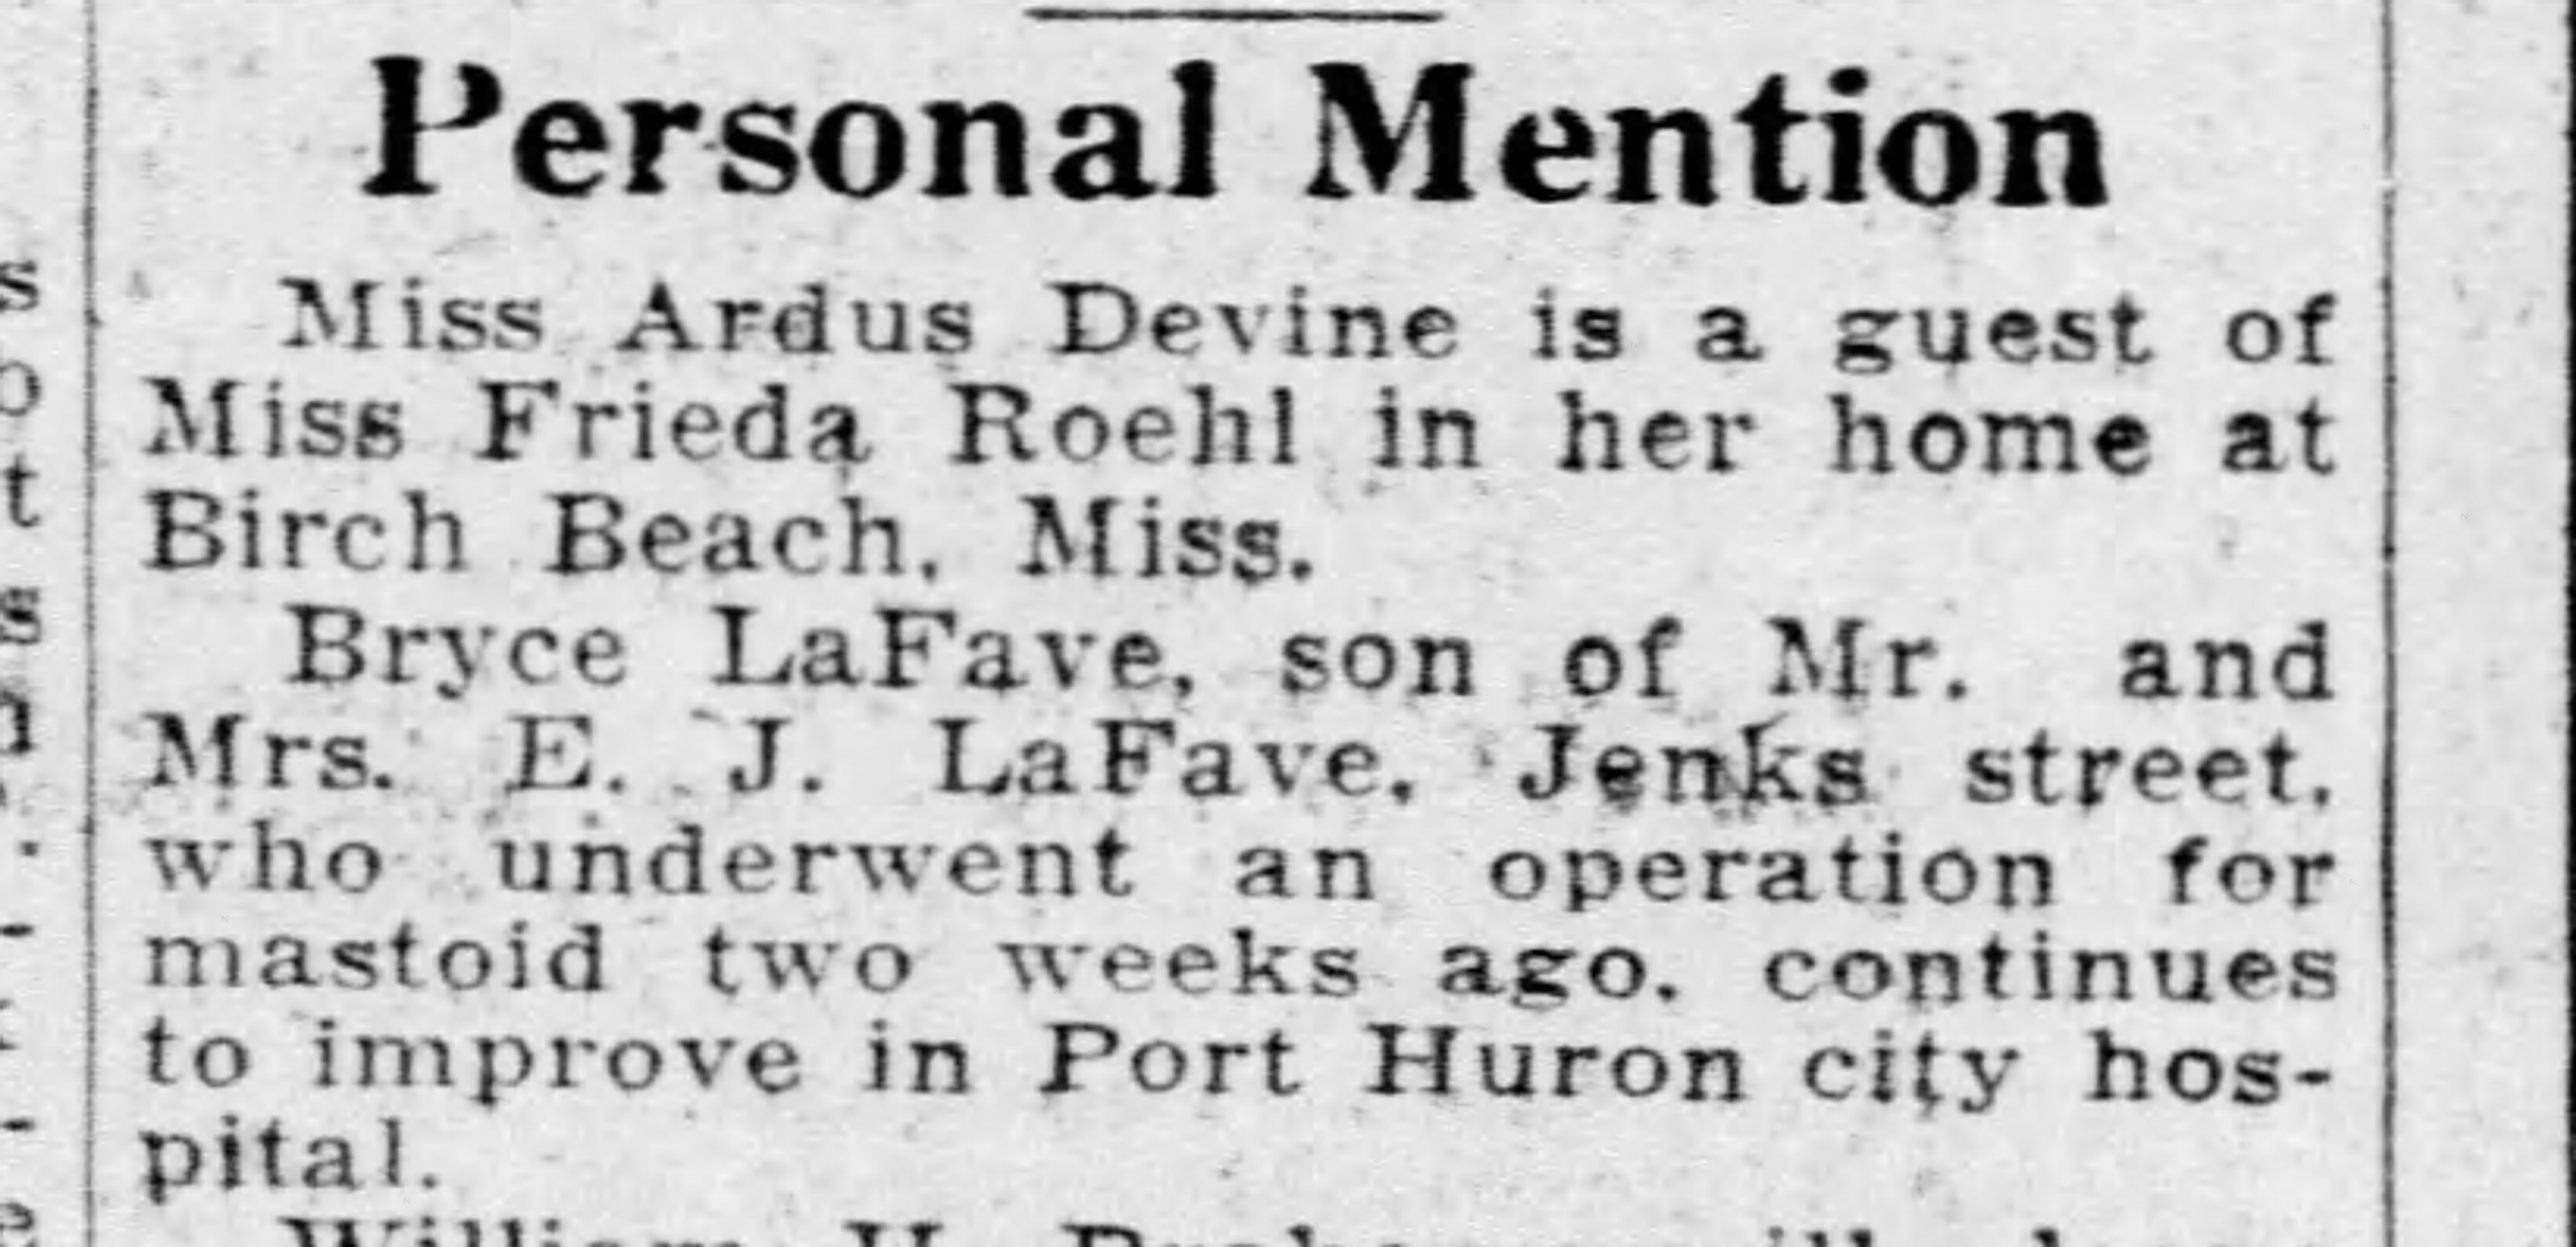 'Personal Mention,' Times Herald, August 9, 1929